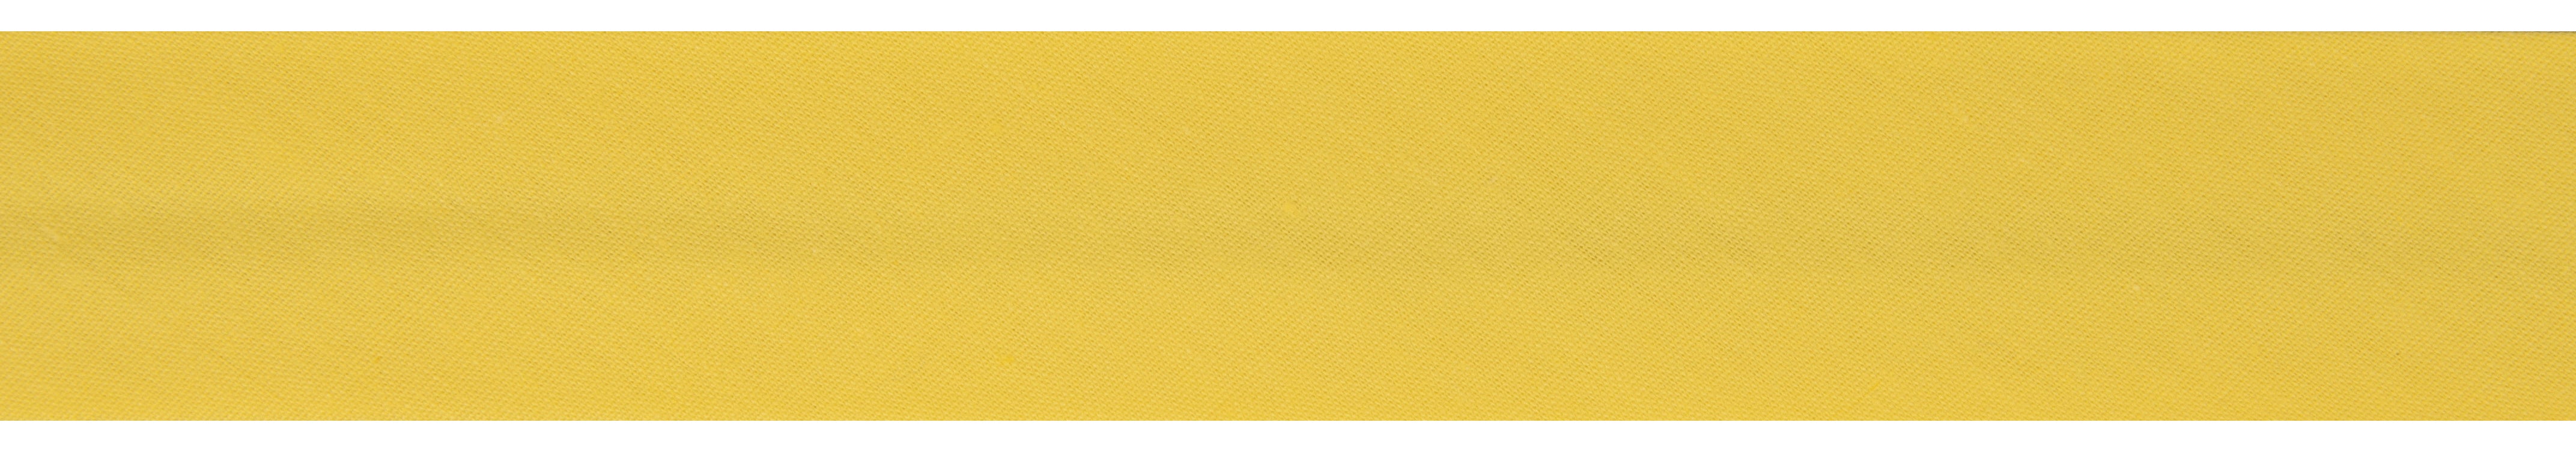 Canary Yellow Bias Binding | Narrow from Jaycotts Sewing Supplies